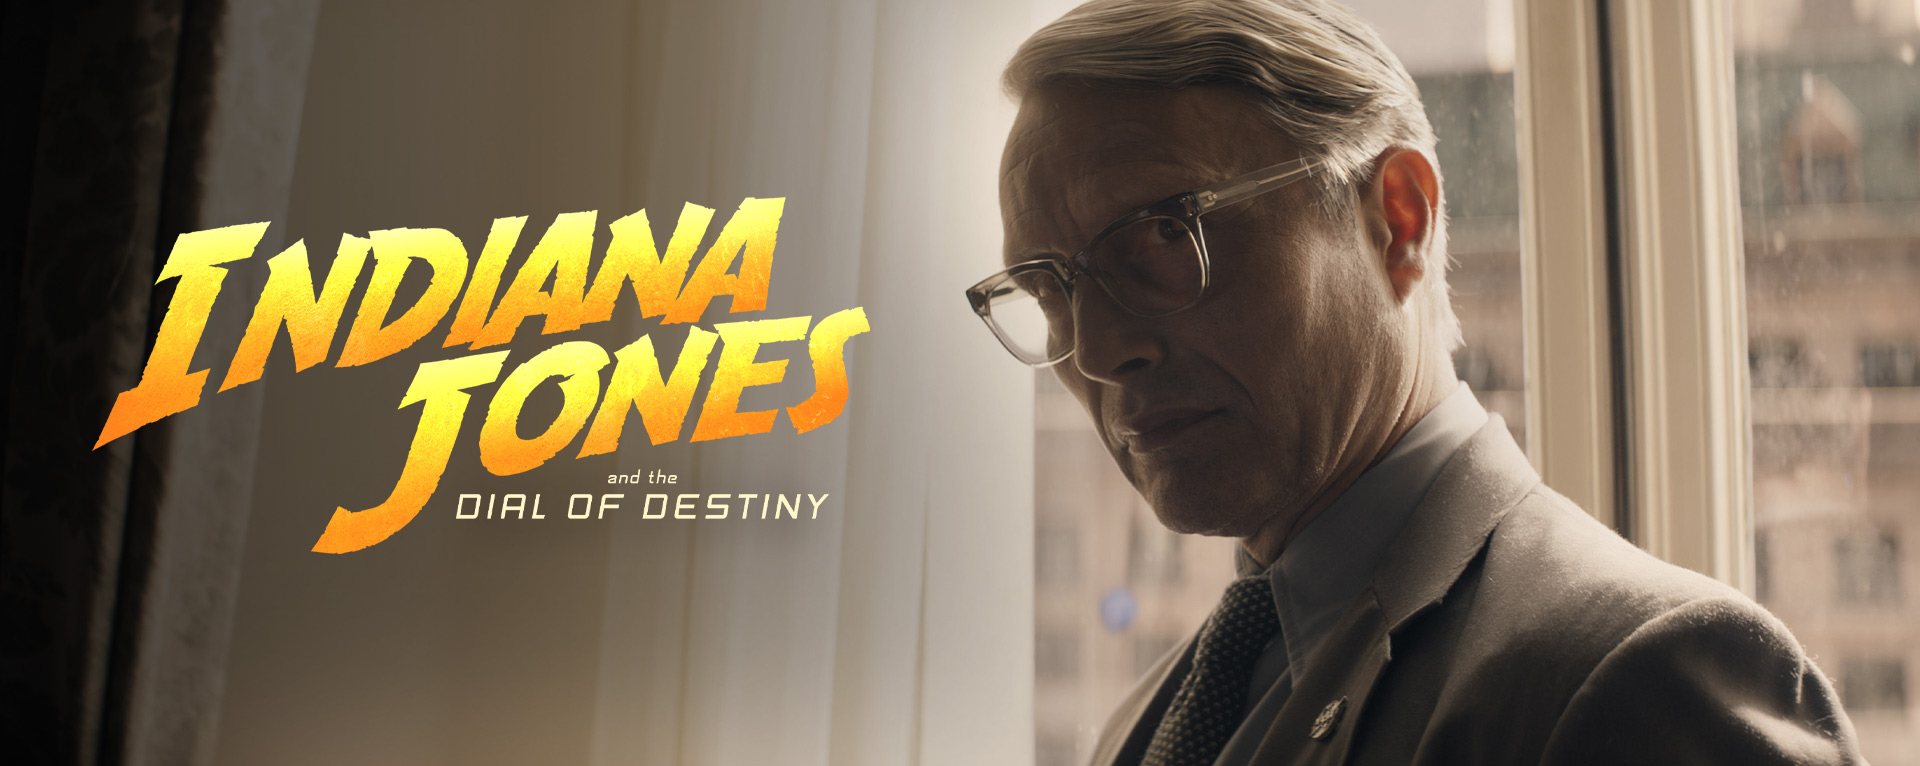 Here's How To Watch 'Indiana Jones And The Dial Of Destiny' At Home Free  Online: When Will Indiana Jones 5 (2023) Be Streaming On Disney Plus Or  Netflix